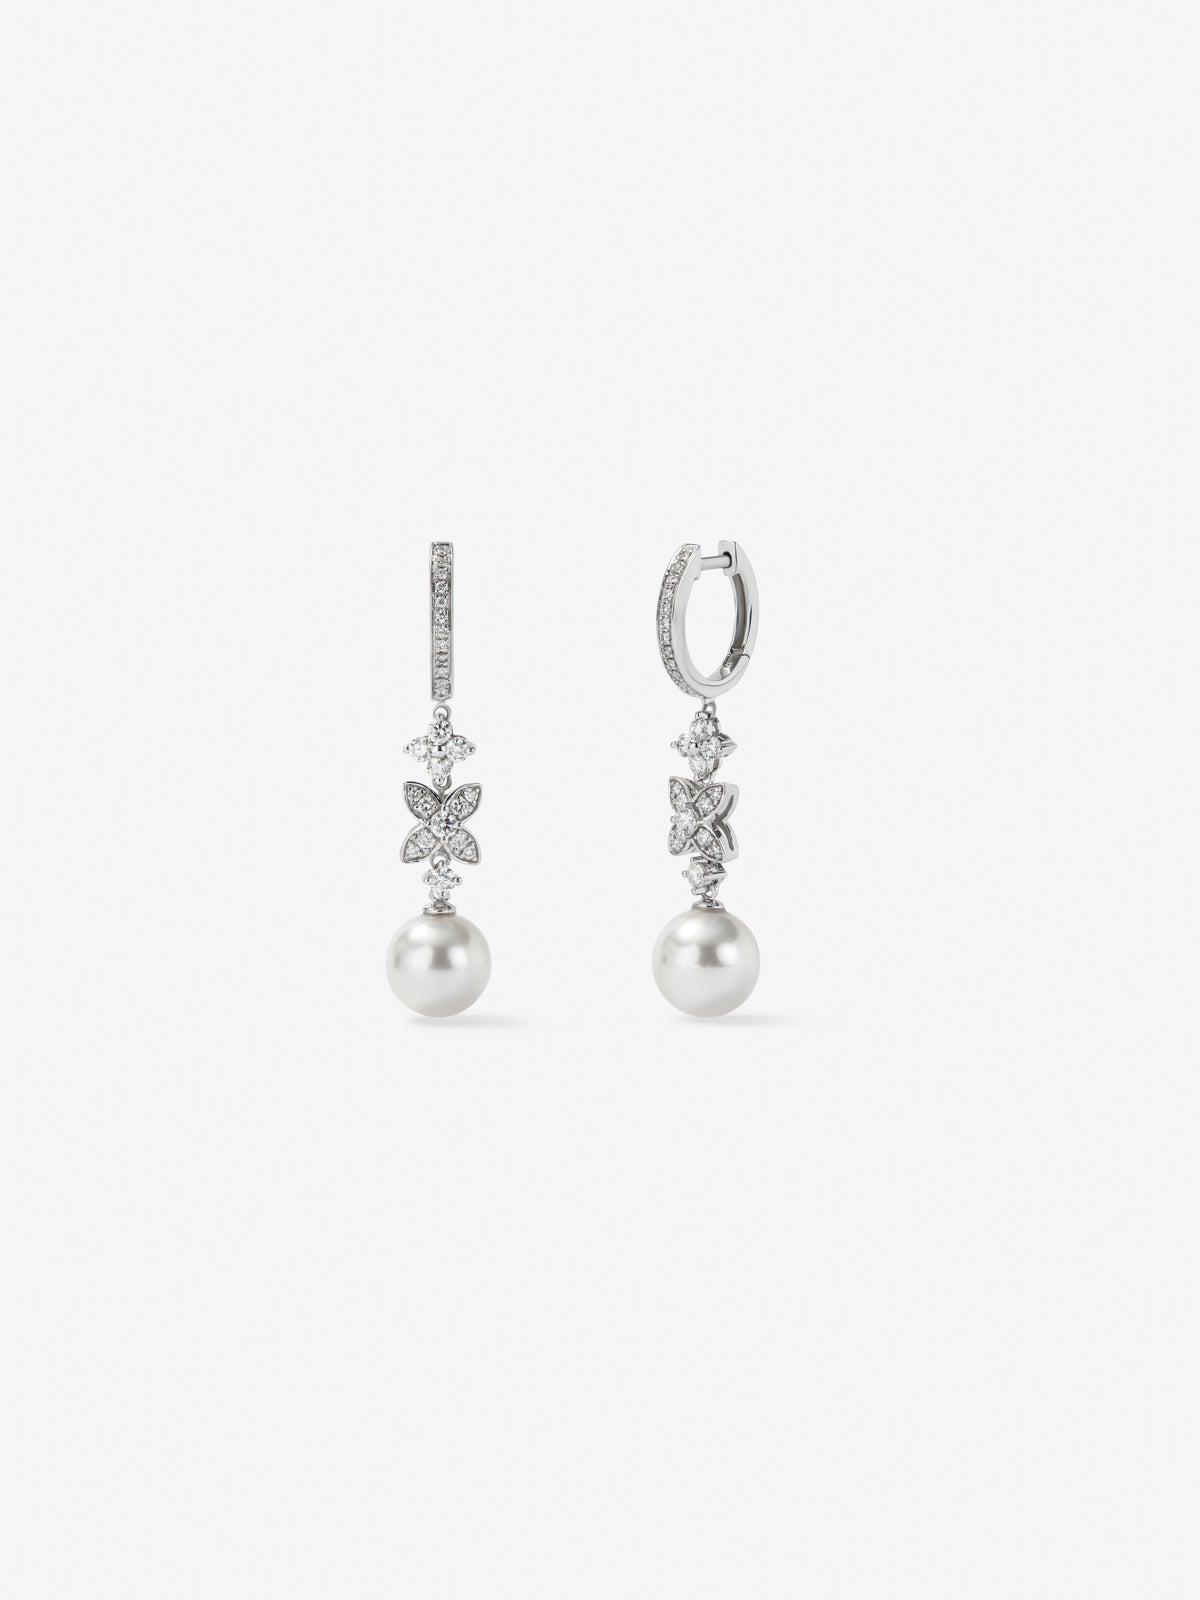 18K white gold earrings with 52 brilliant-cut diamonds with a total of 0.59 cts and 2 8.5 mm Akoya pearls